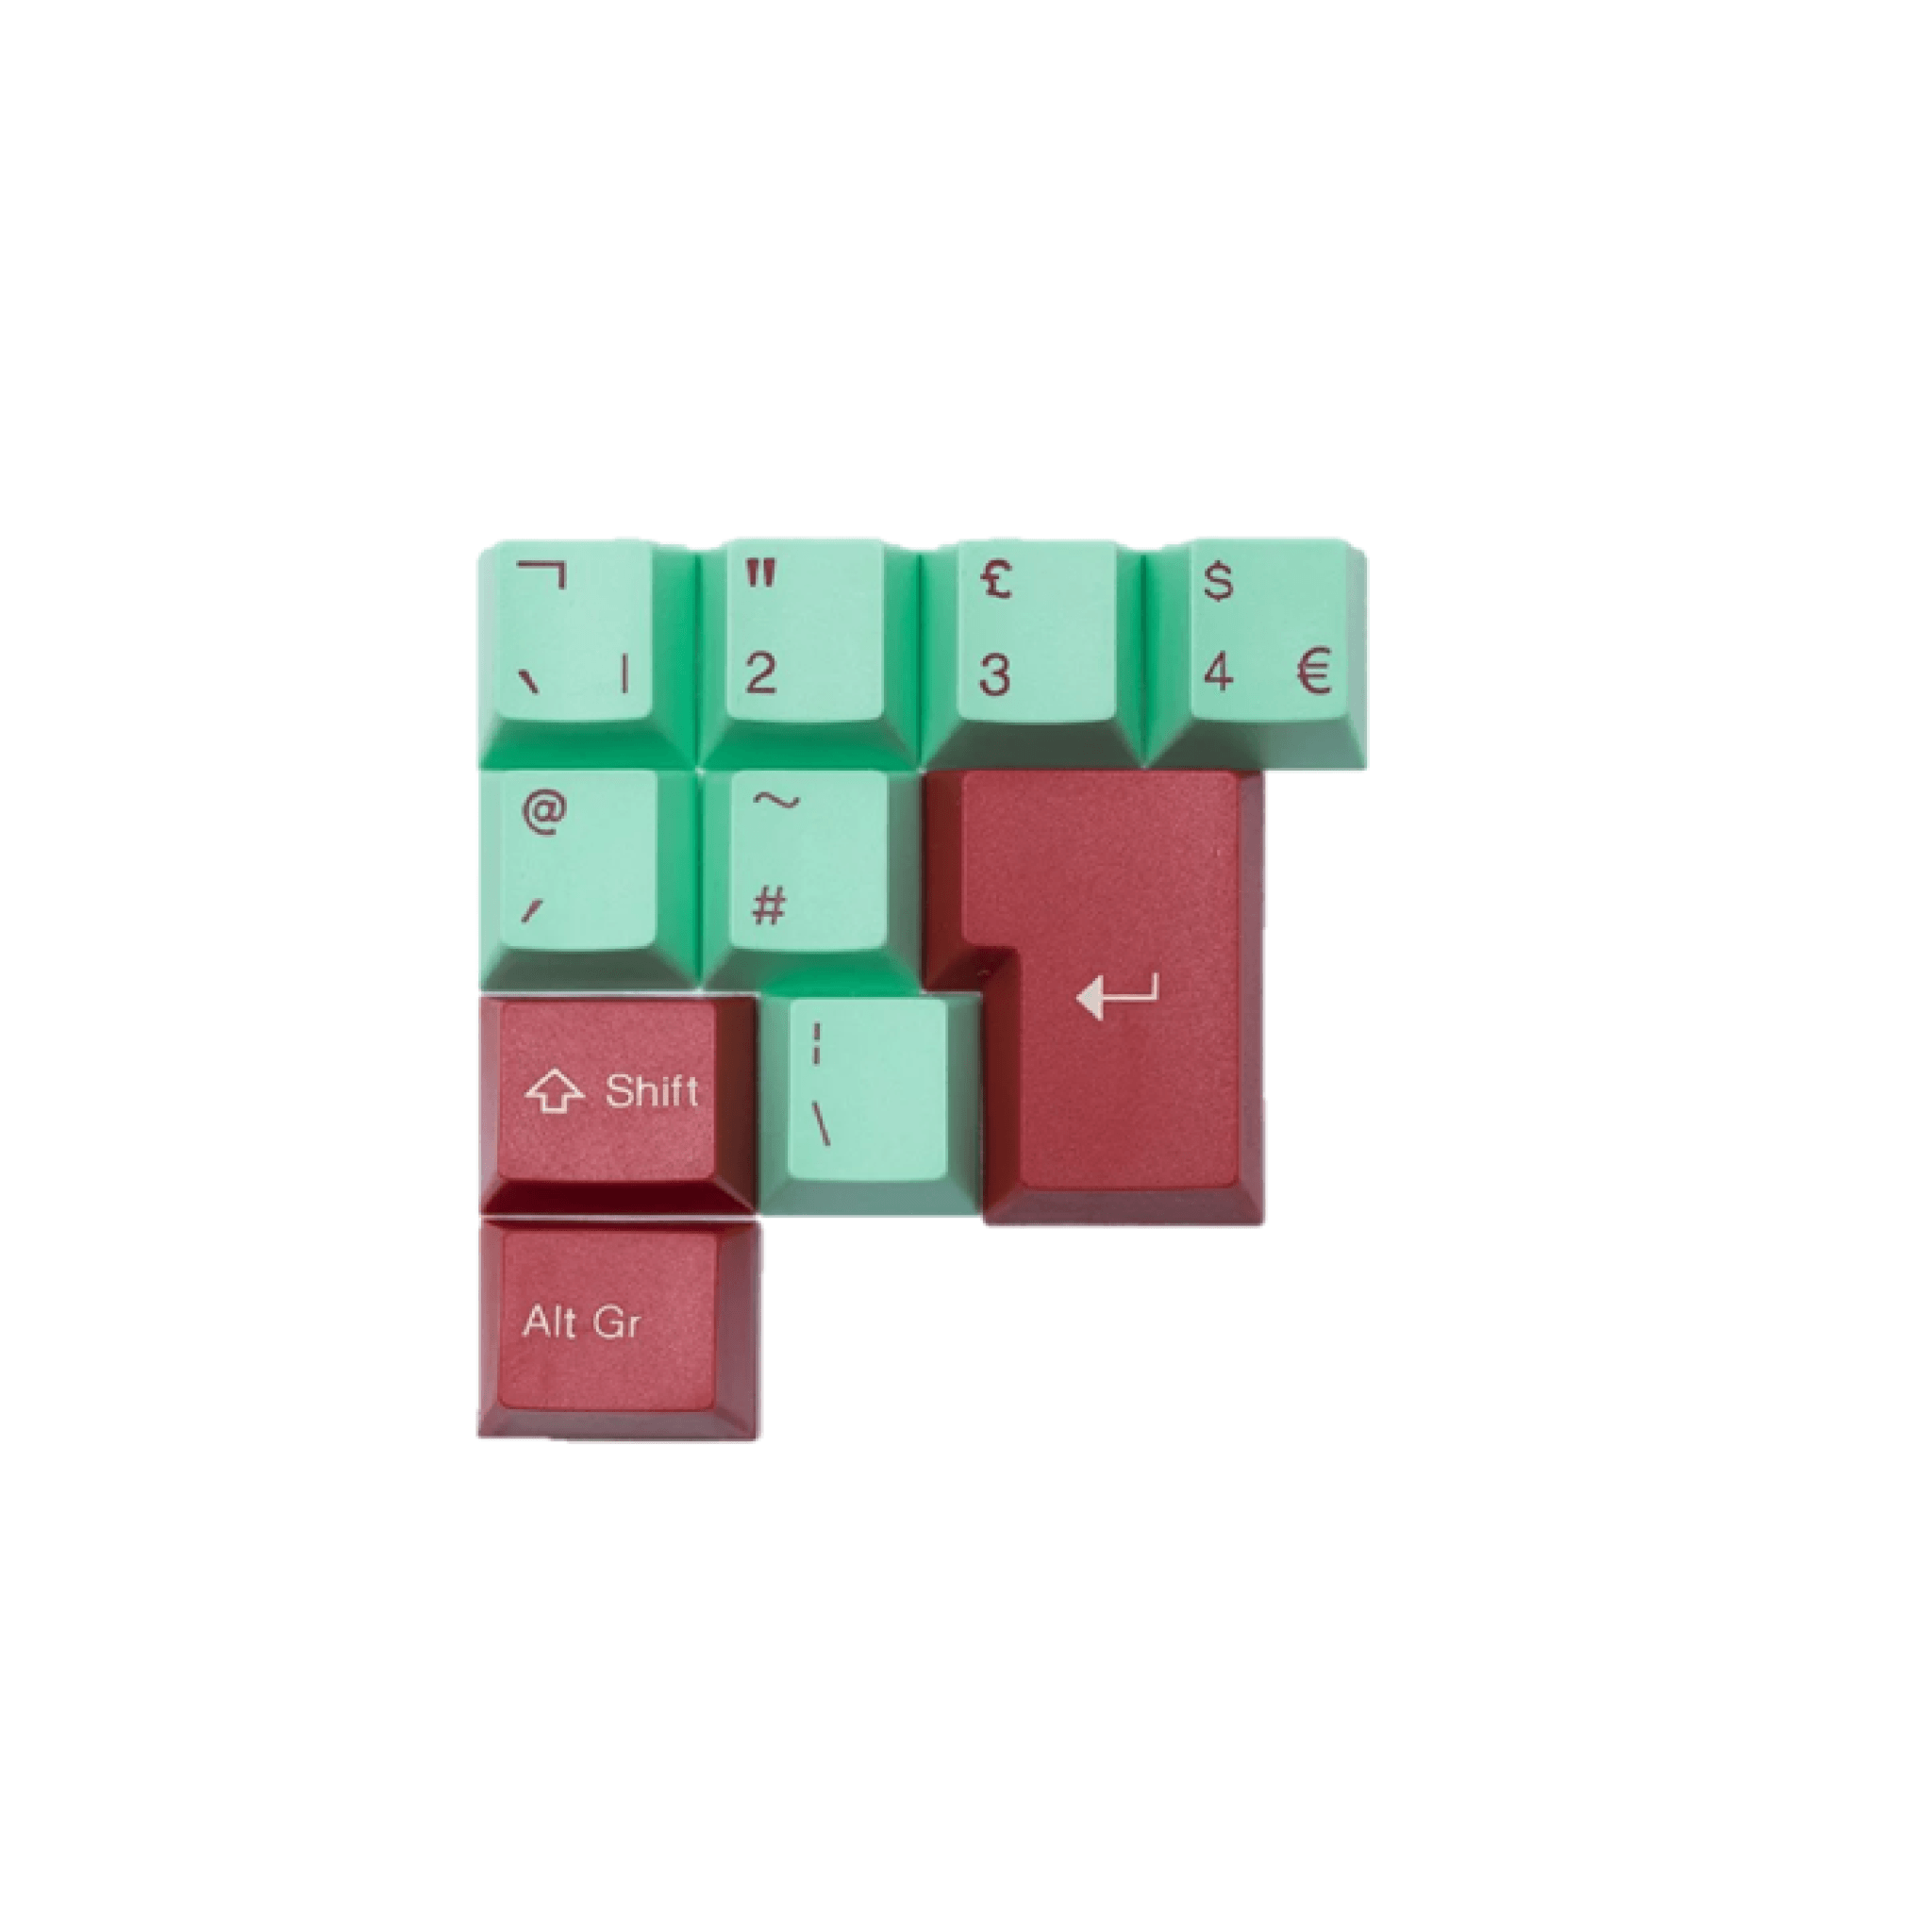 Tai-Hao Abs Keyset-Cubic 10 Uk Add-On - Mint/Red - Store 974 | ستور ٩٧٤